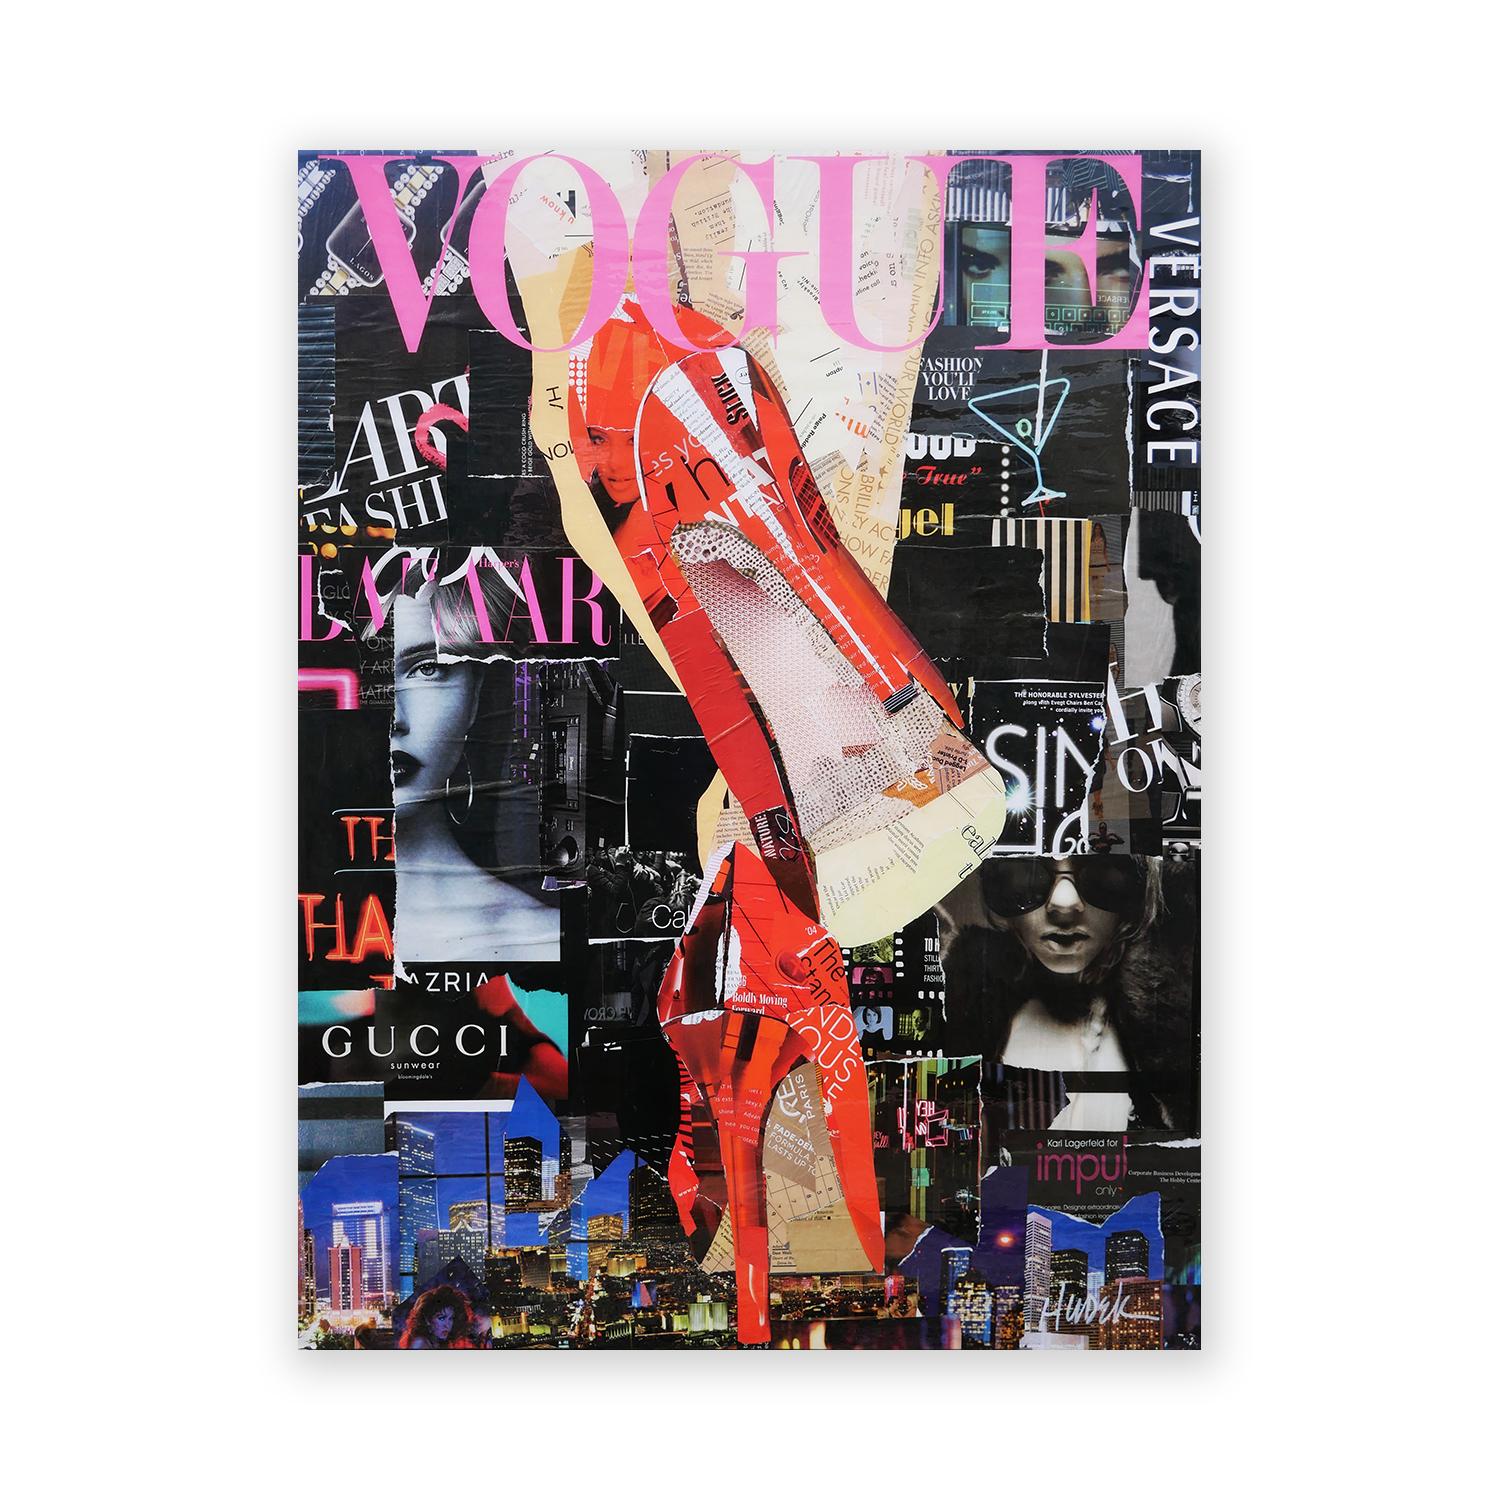 Contemporary fashion pop art collage by Houston, Texas artist Jim Hudek. The work features a close up of a pair of red high heels composed of a collage of magazine cut outs with the word 